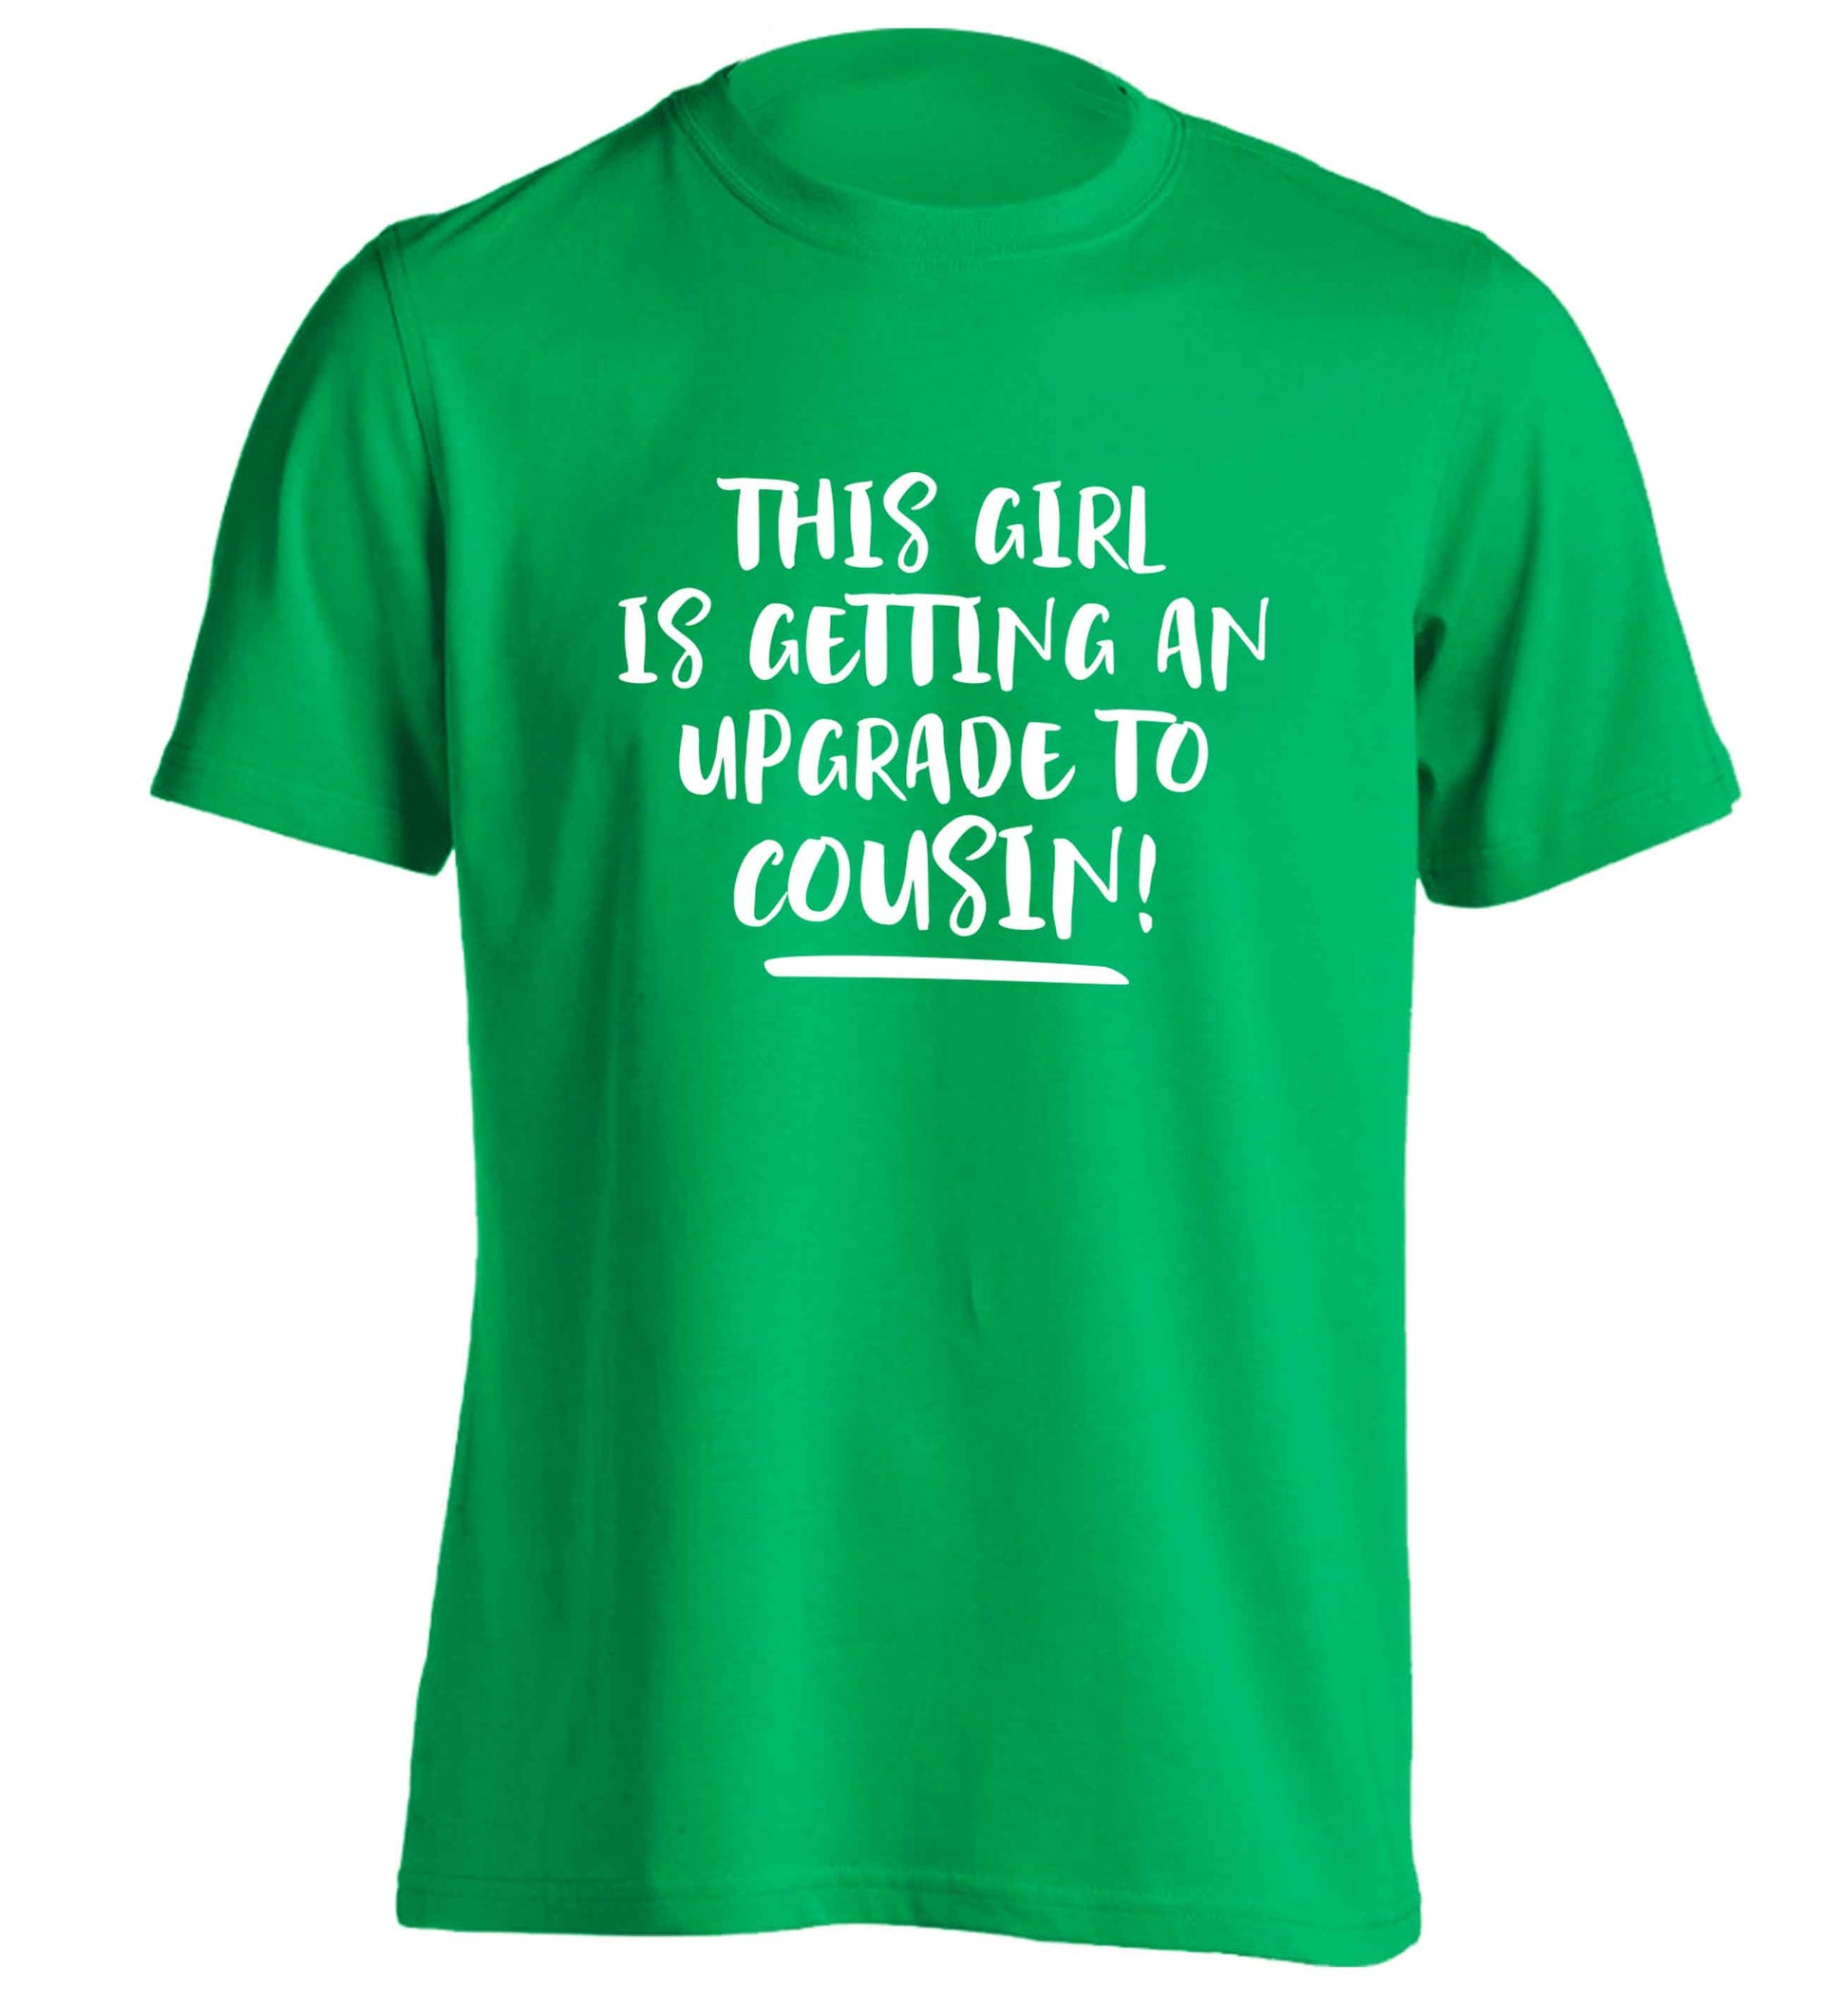 This girl is getting an upgrade to cousin! adults unisex green Tshirt 2XL